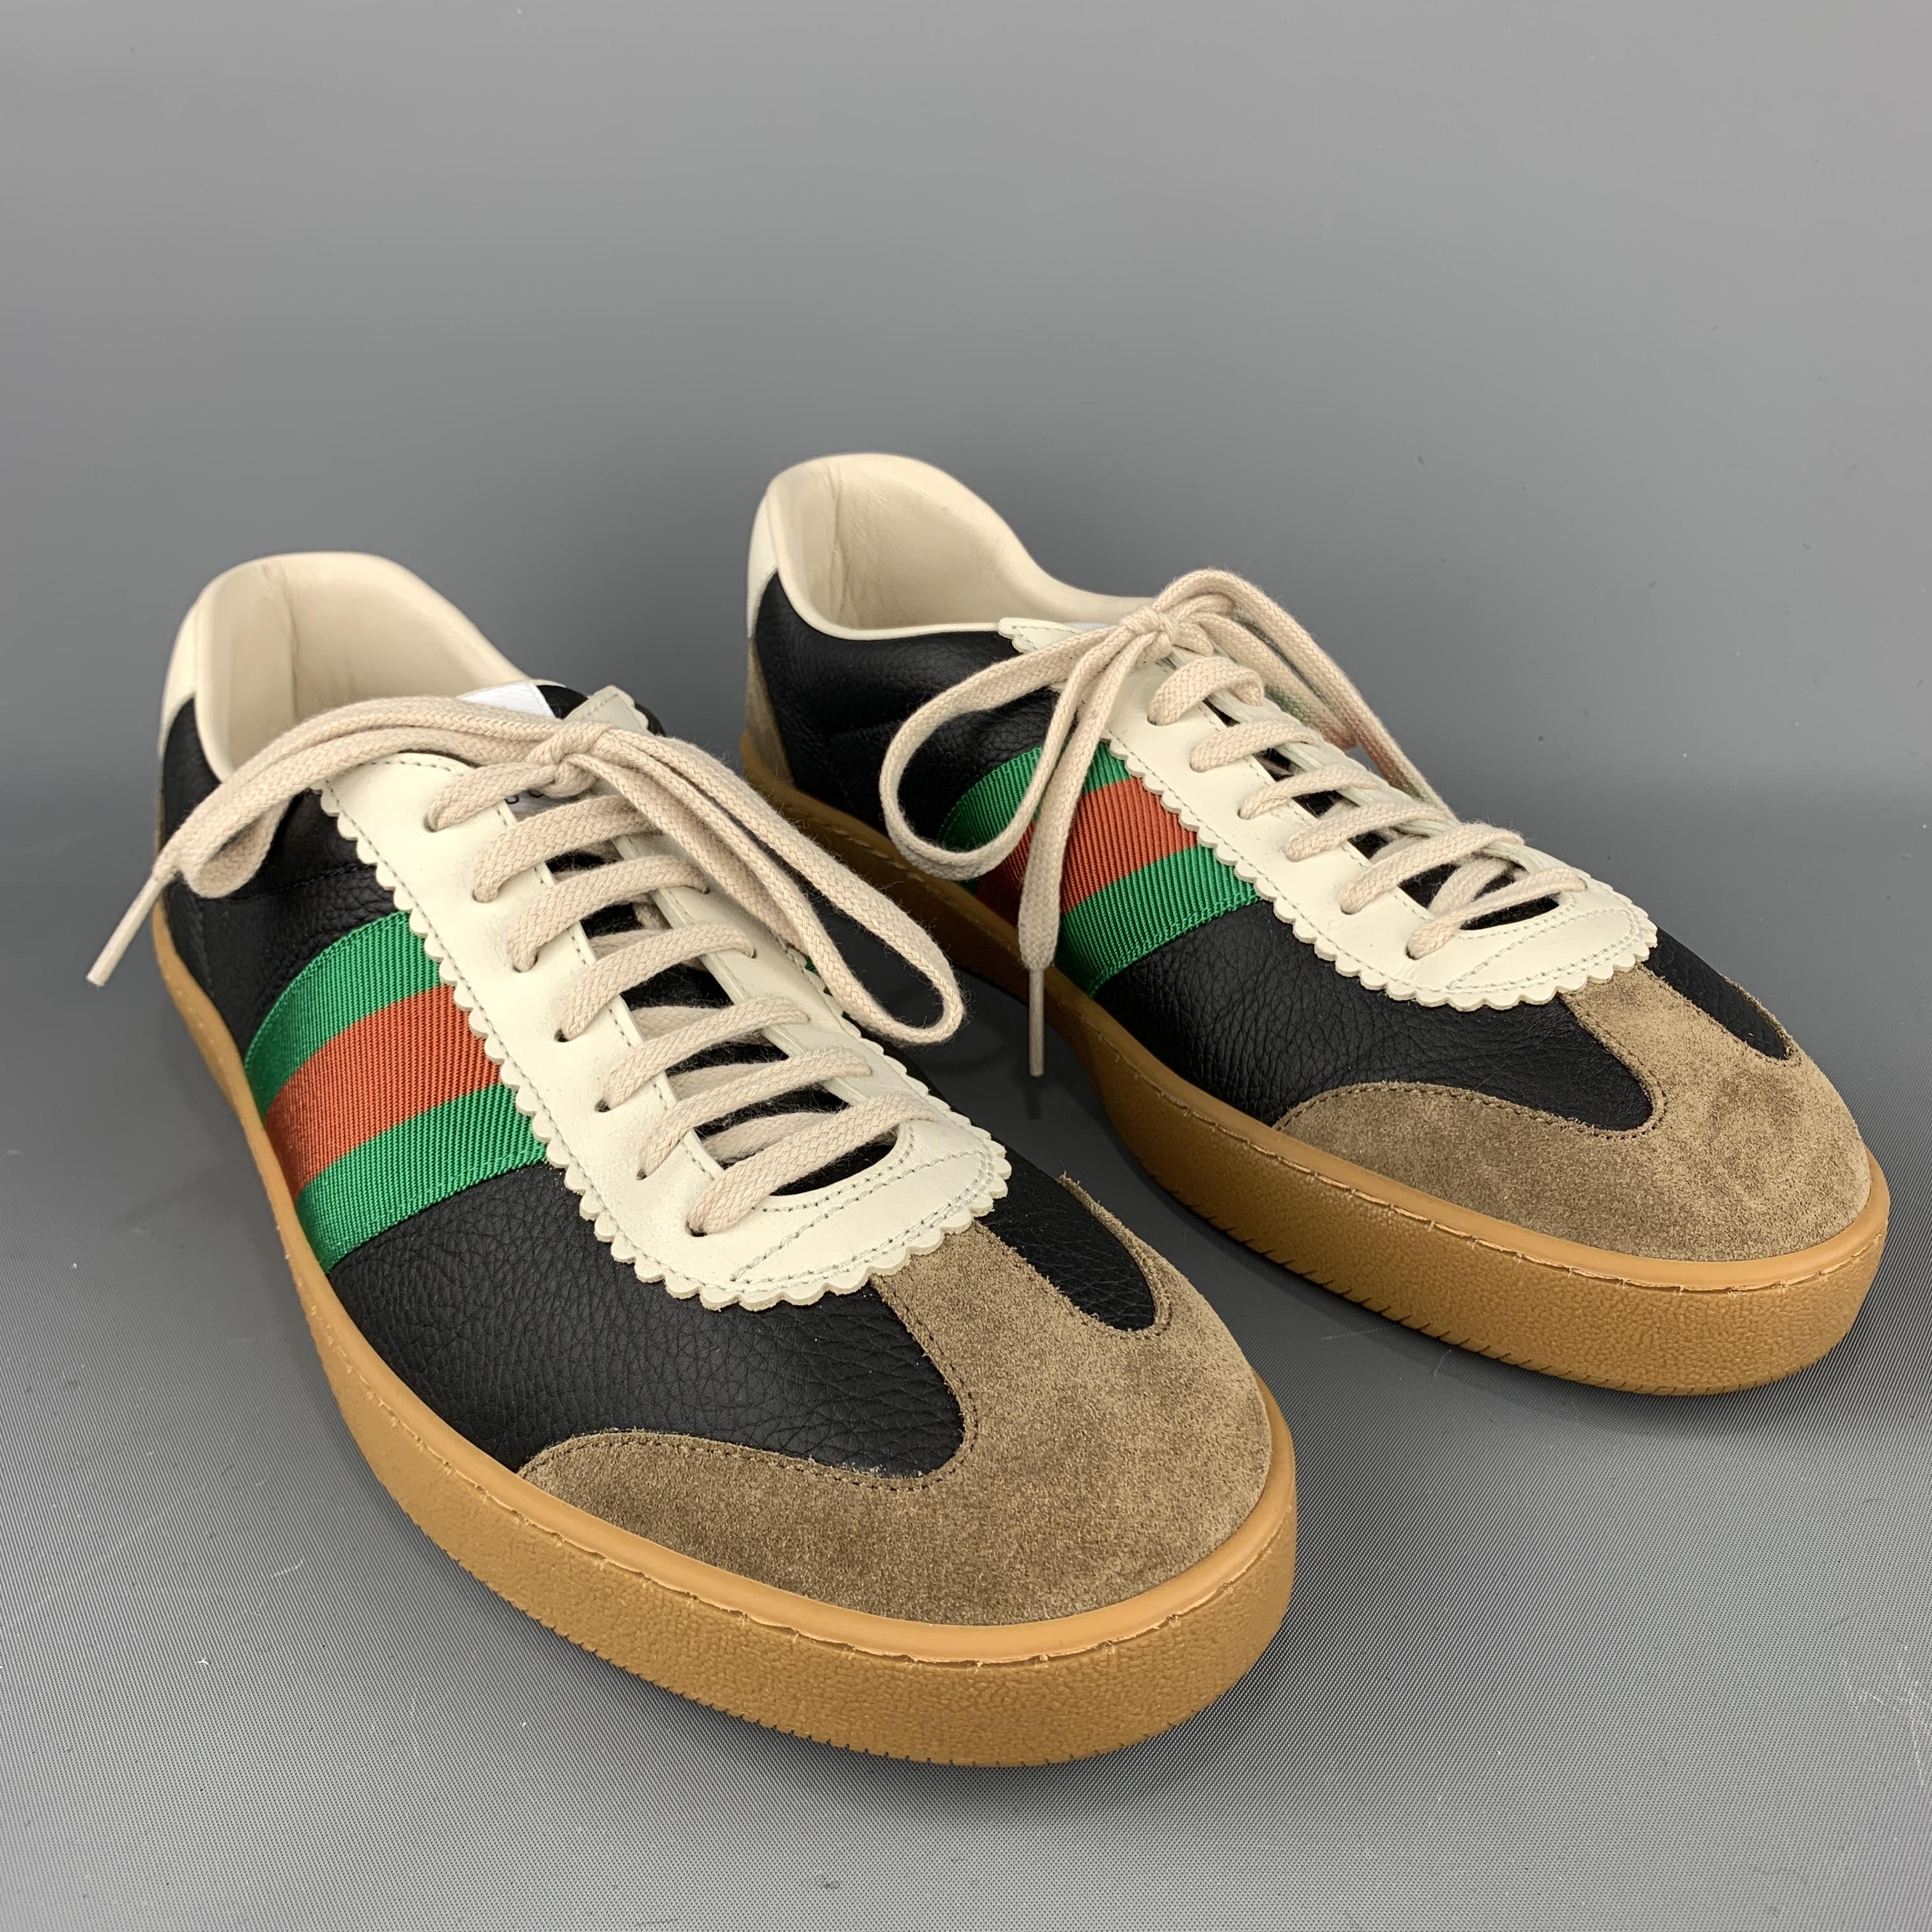 GUCCI Web Sneakers comes in a mix of materials, with a black textured leather and a brown suede at details, a beige leather trim, a striped vintage style nylon web trim at sides, a printed gold bee at back, a rubber sole, lace up. Made in